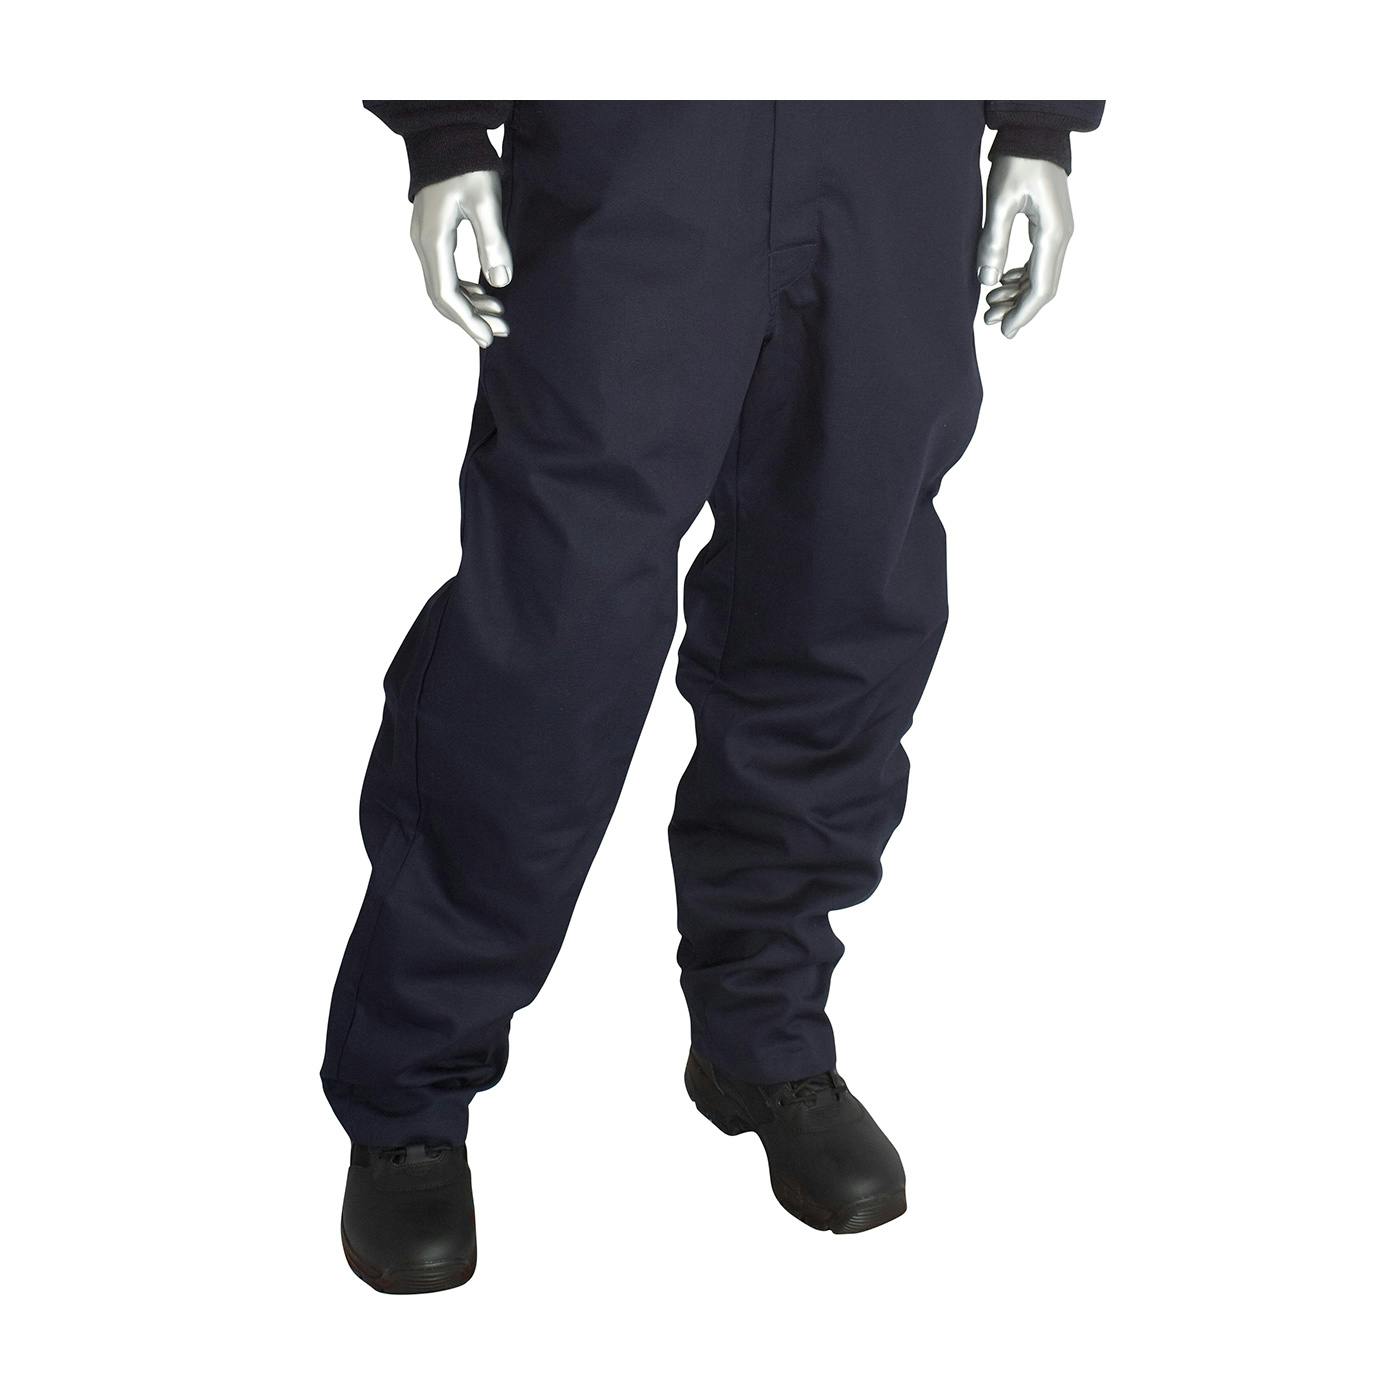 AR/FR Dual Certified Coverall - 8 Cal/cm2, Navy (9100-2160D)